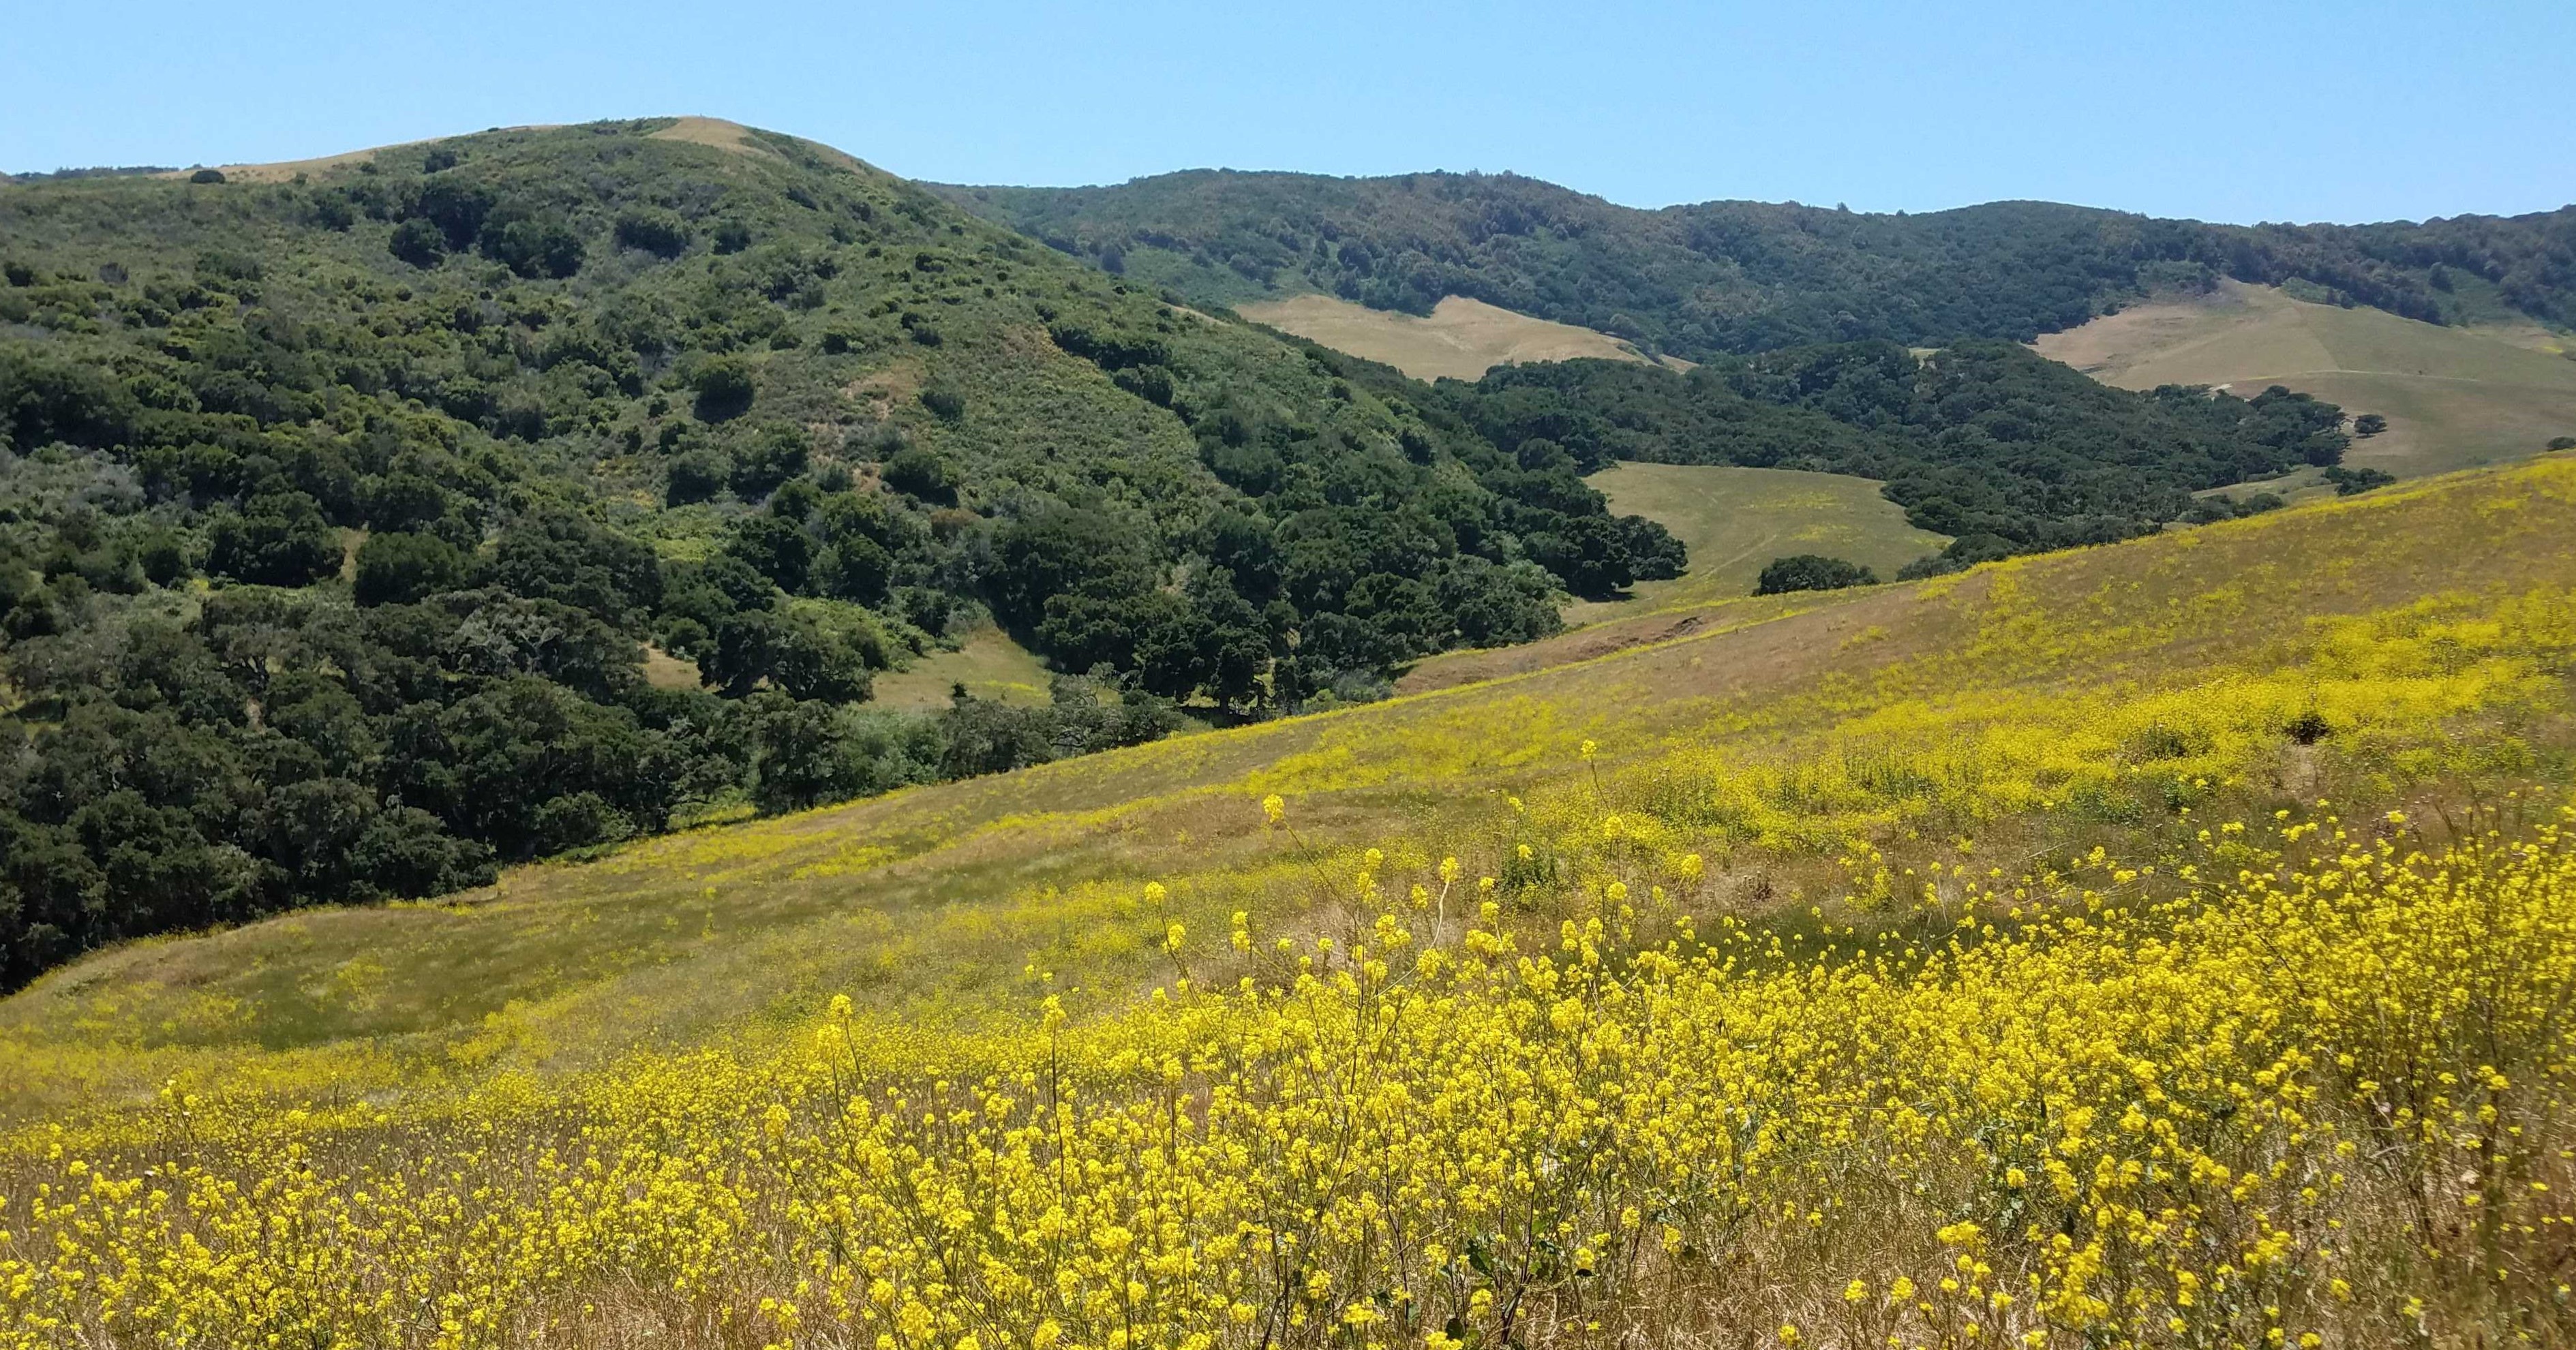 A hill covered with yellow flowers with another tree-covered hill in the background